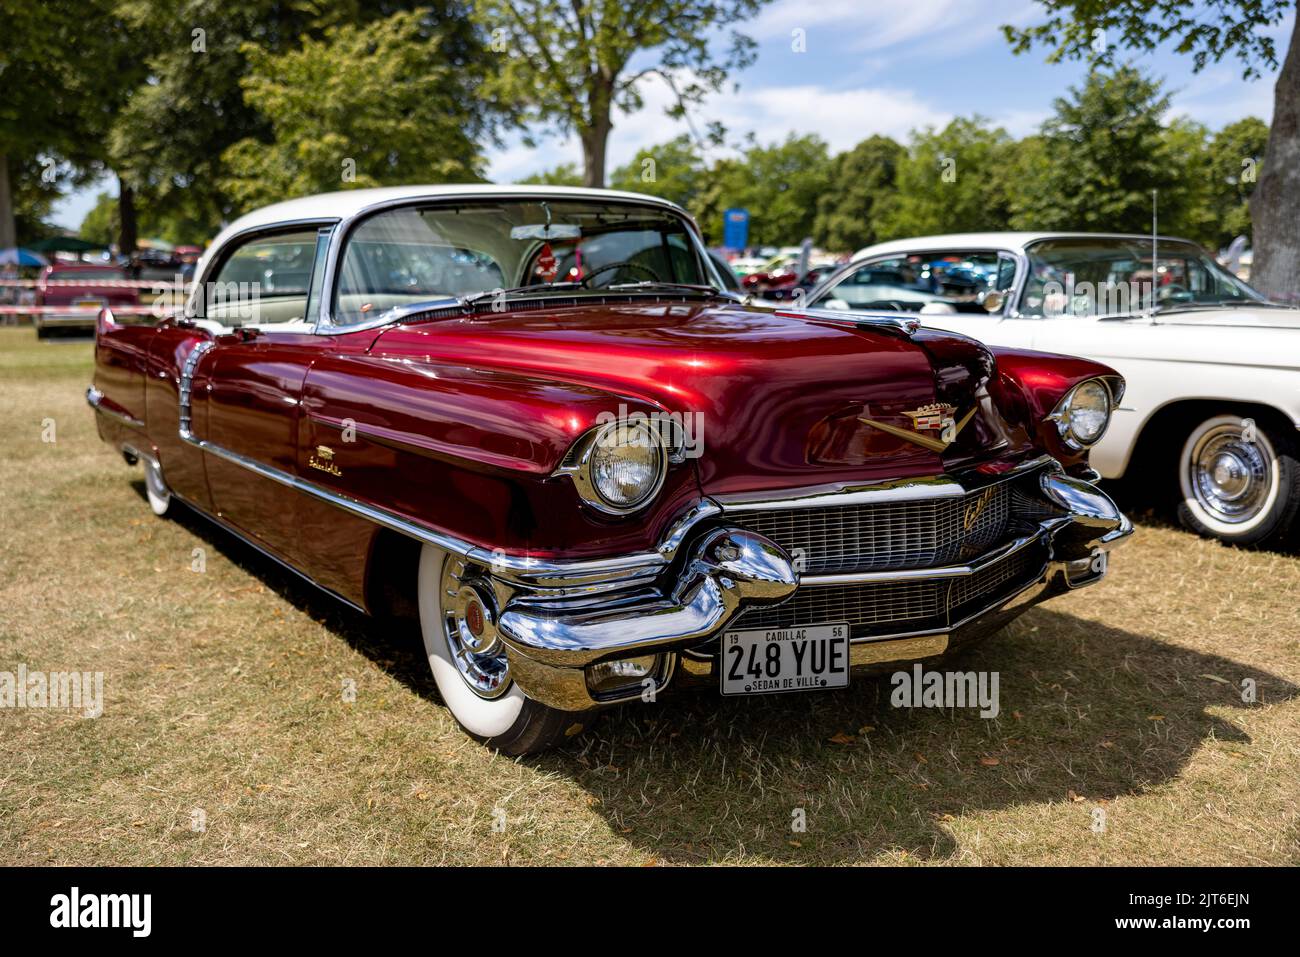 1956 Cadillac Series 62 Coupe deVille ‘248 YUE’ on display at the American Auto Club Rally of the Giants, held at Blenheim Palace on the 10 July 2022 Stock Photo